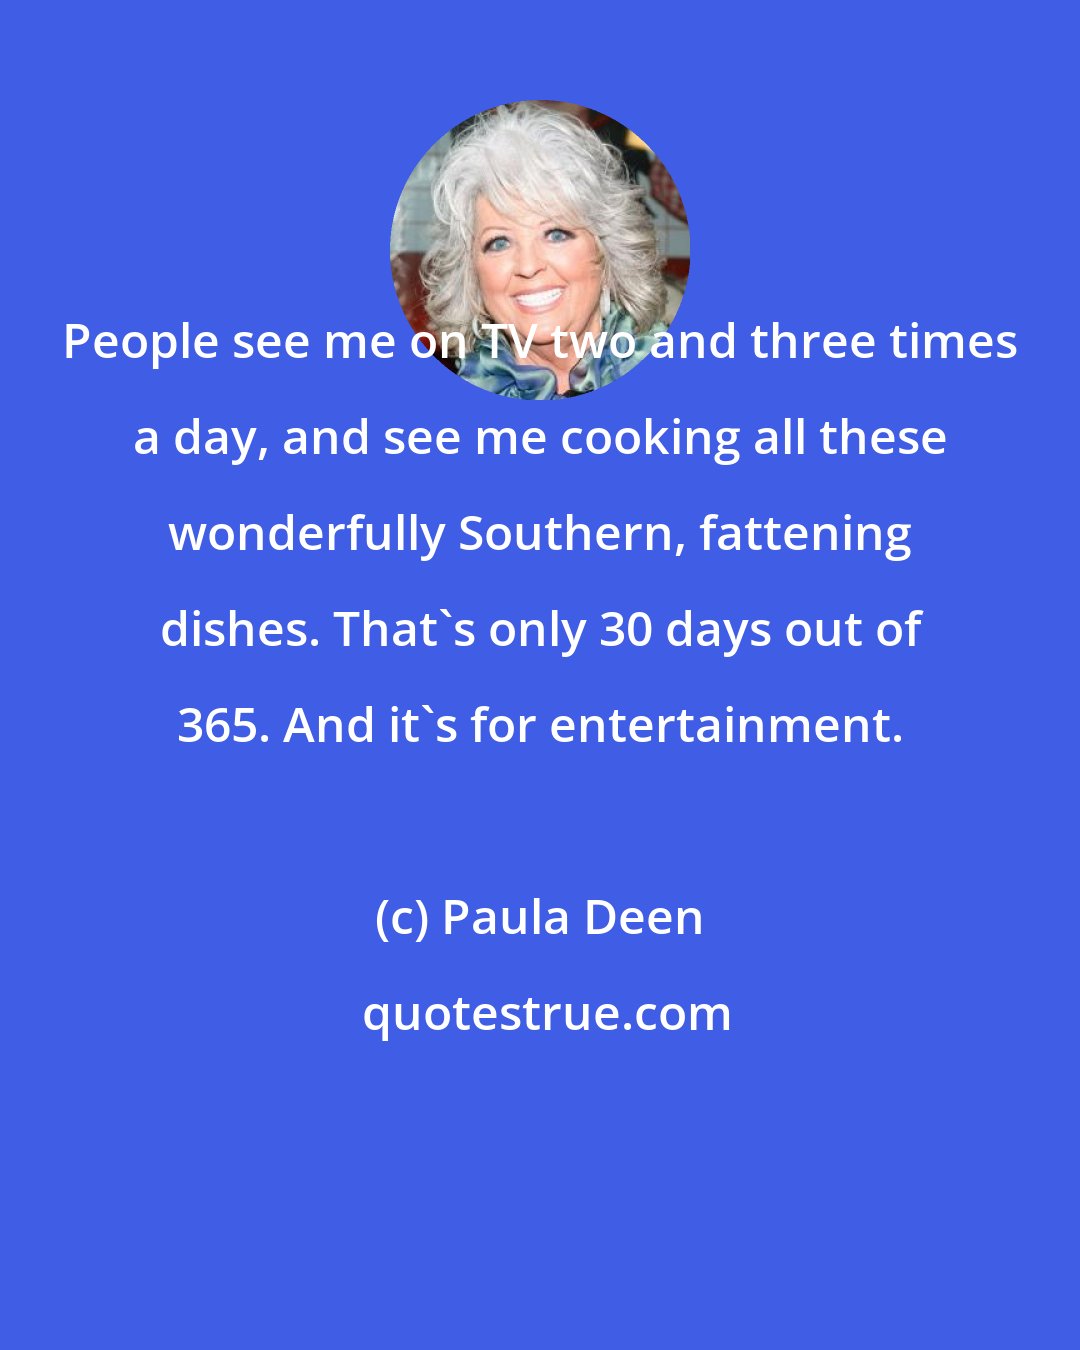 Paula Deen: People see me on TV two and three times a day, and see me cooking all these wonderfully Southern, fattening dishes. That's only 30 days out of 365. And it's for entertainment.